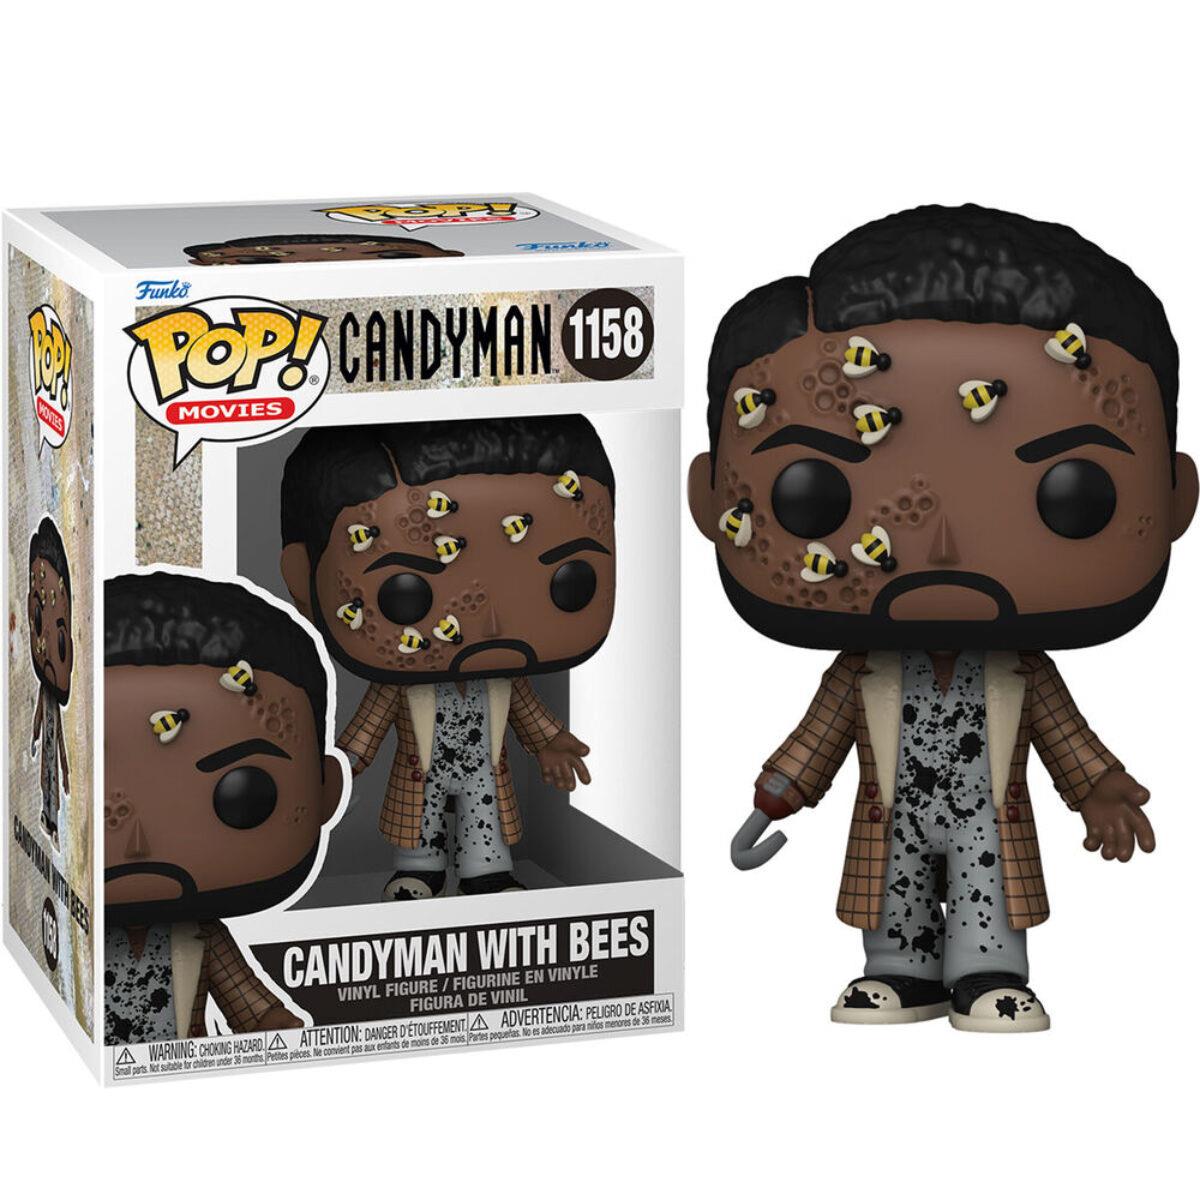 Funko Candyman With Bees Pop! Vinyl